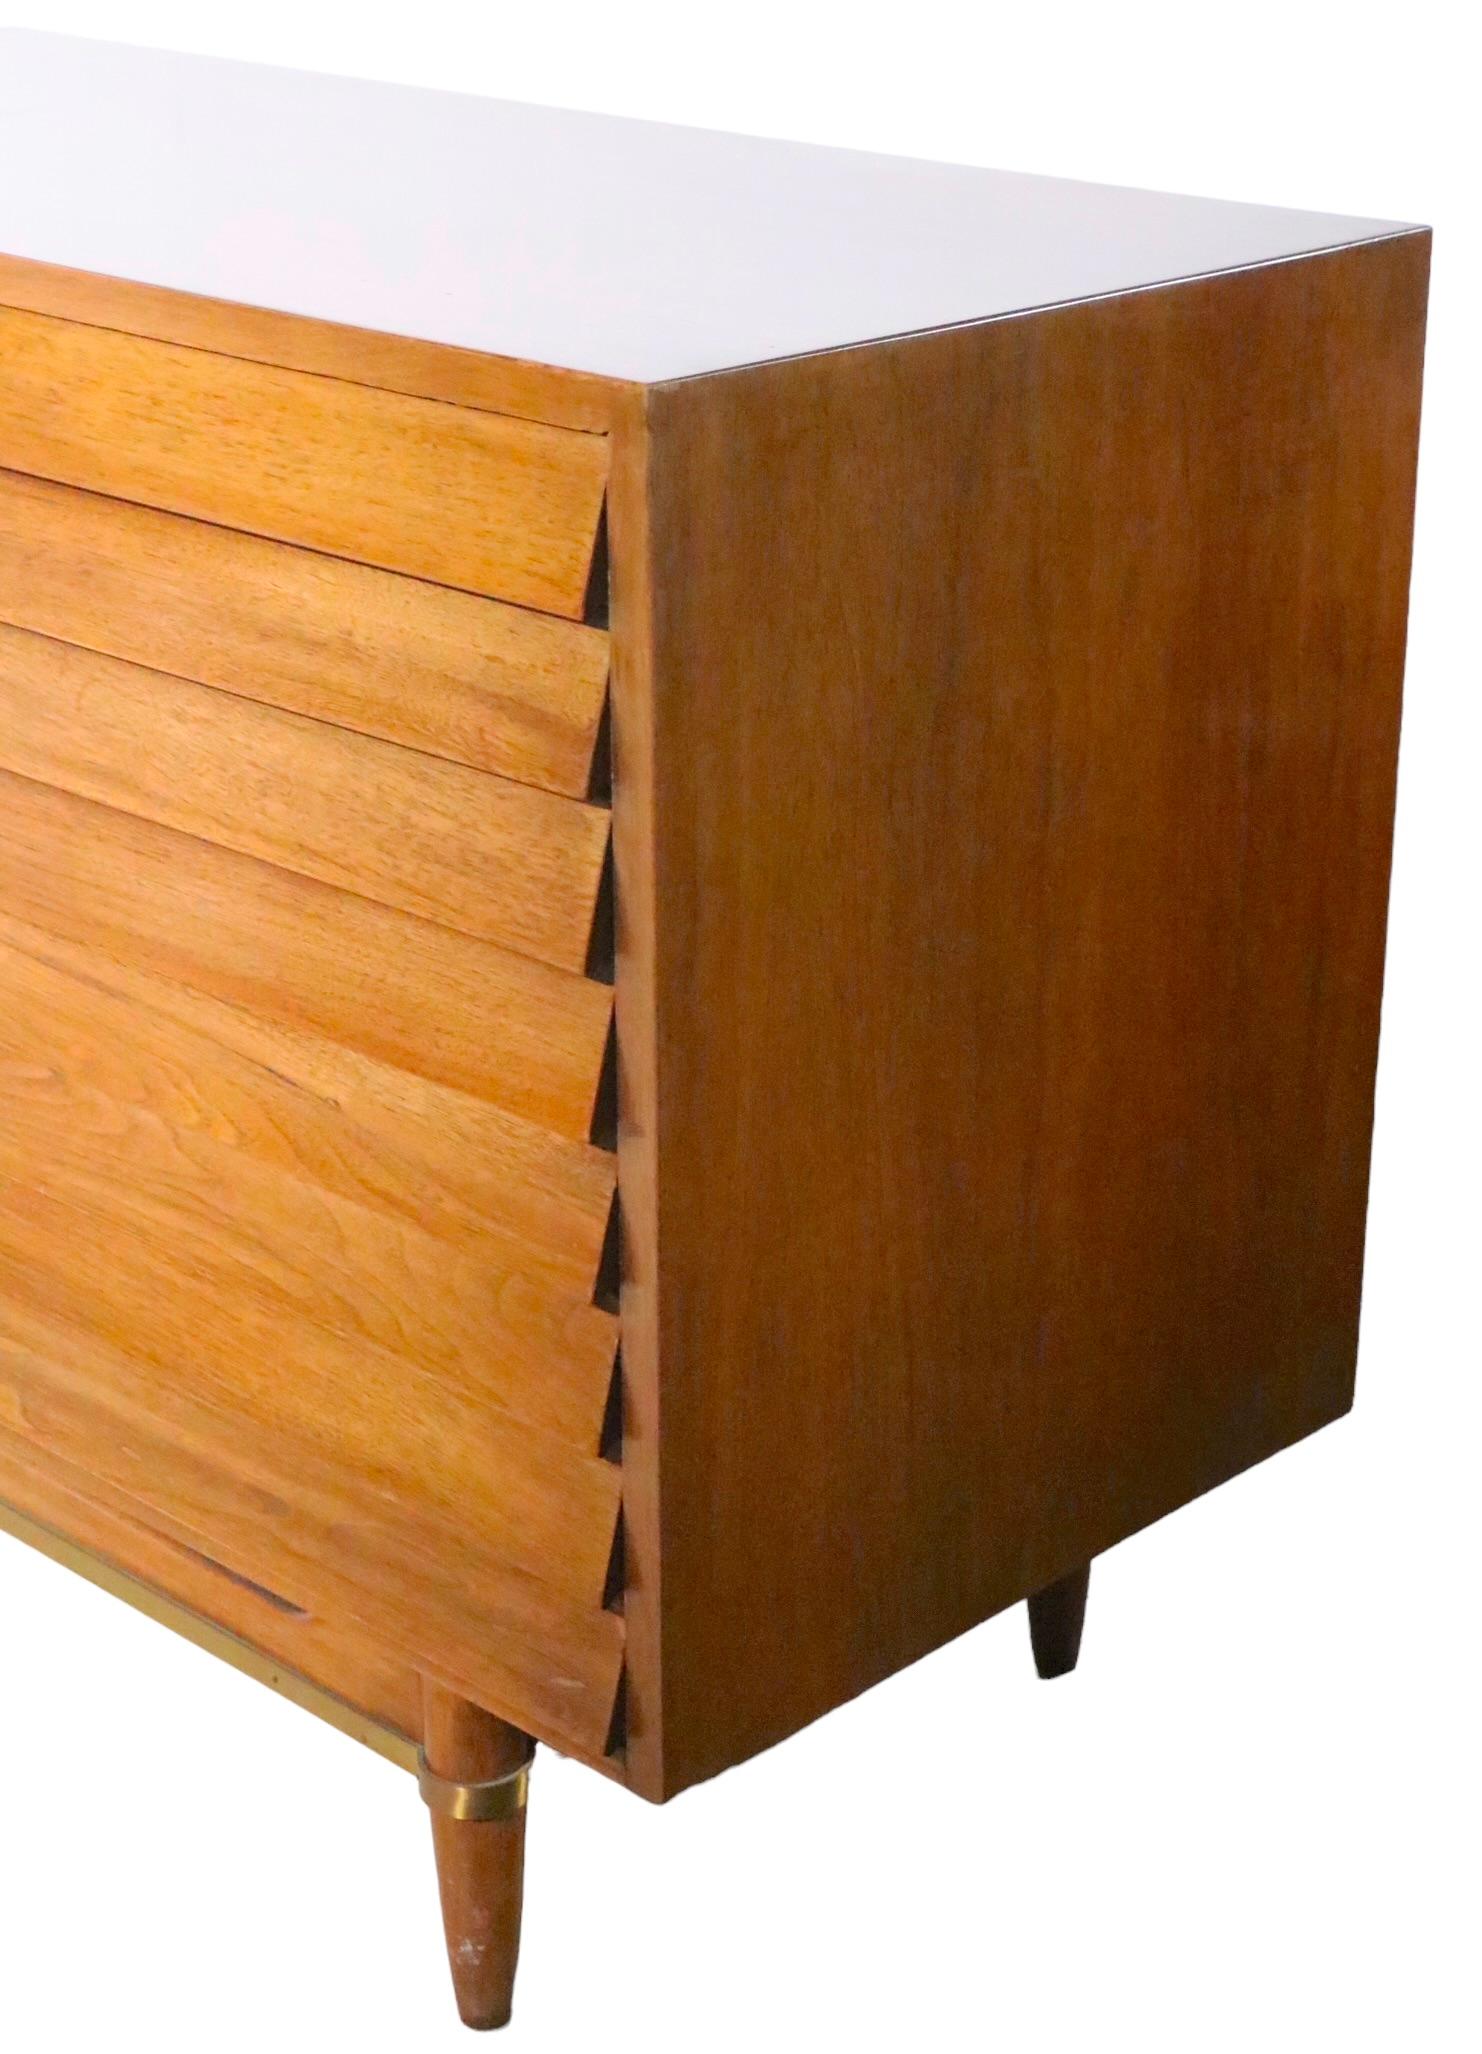 Classic midcentury dresser designed by Merton Gershun for American of Martinsville, as part of the iconic Dania series, circa 1950s. The chest features two banks of three louvered front drawers, which flank two doors that open to reveal three